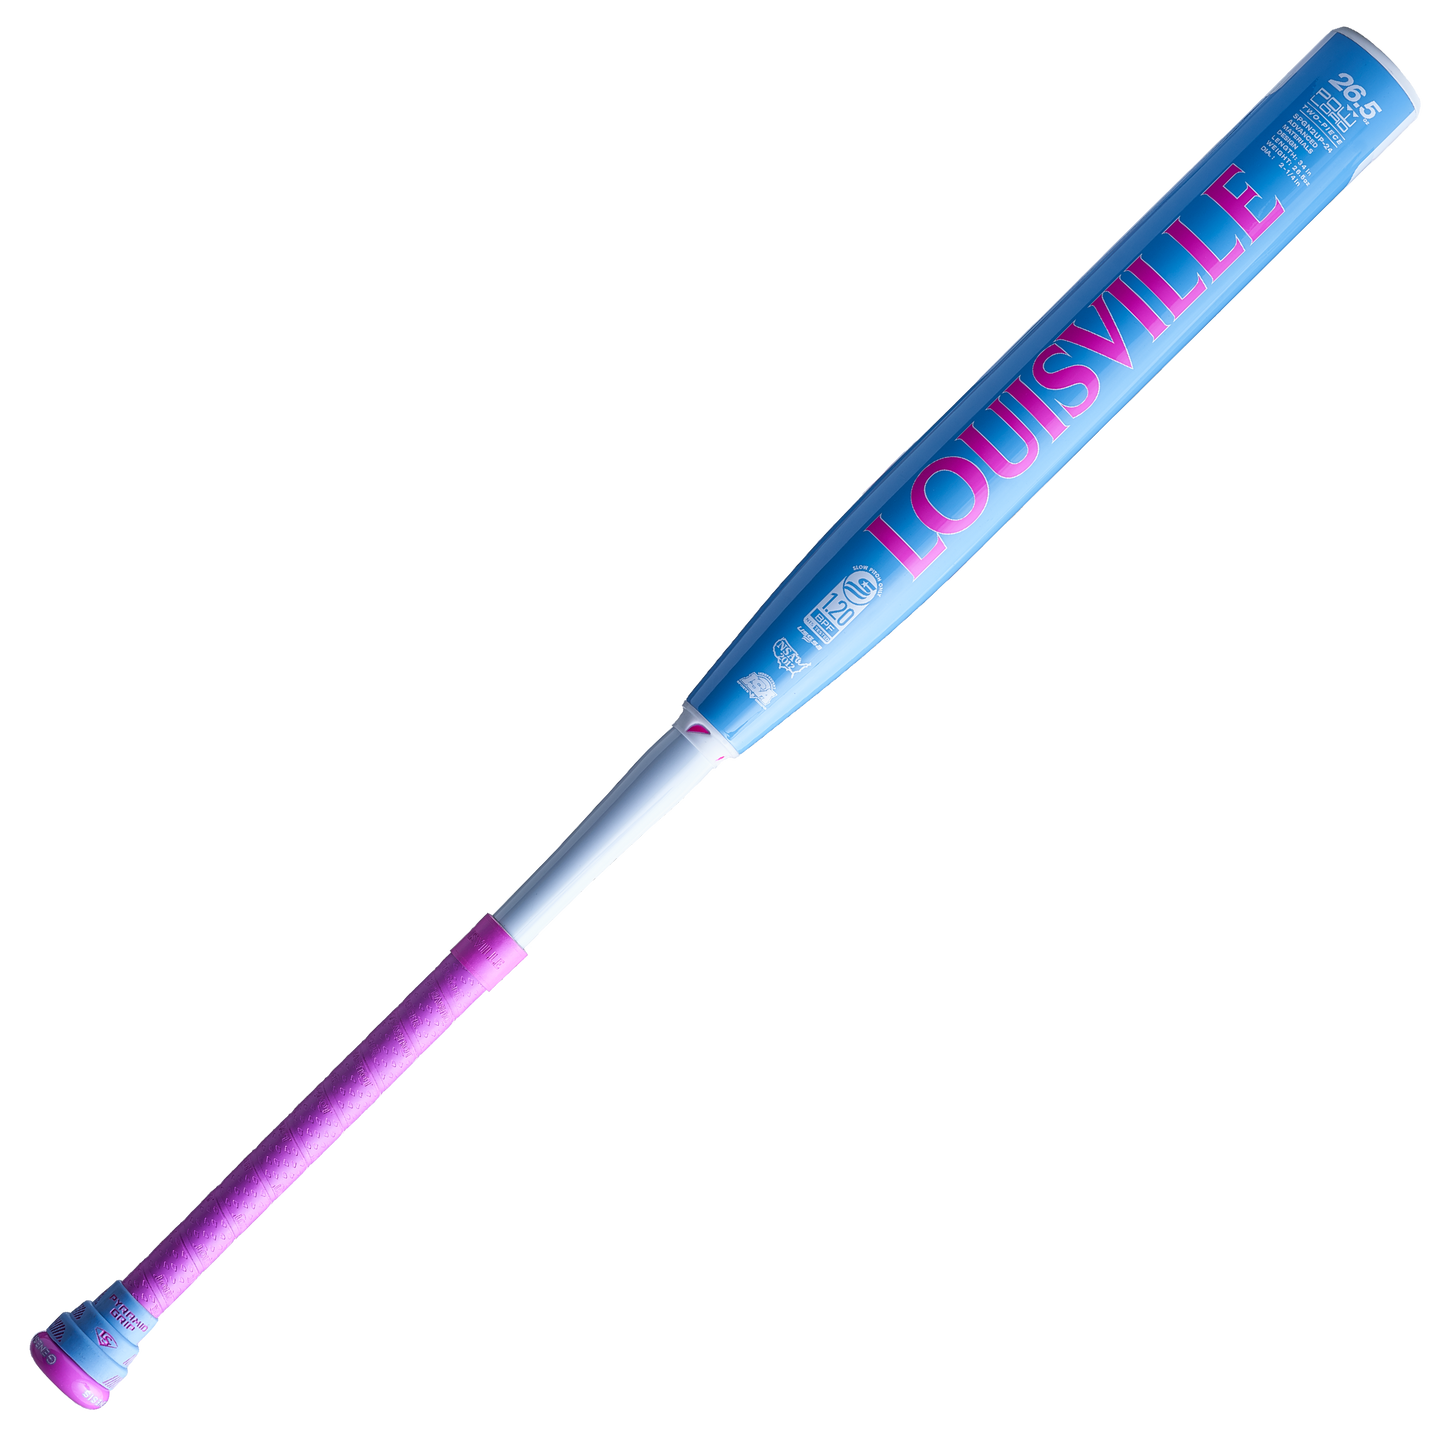 A photo of the Louisville 2024 GENESIS 2 PIECE "BUBBLE GUM" POWERLOAD USSSA BAT. It is light blue, pink, and white.